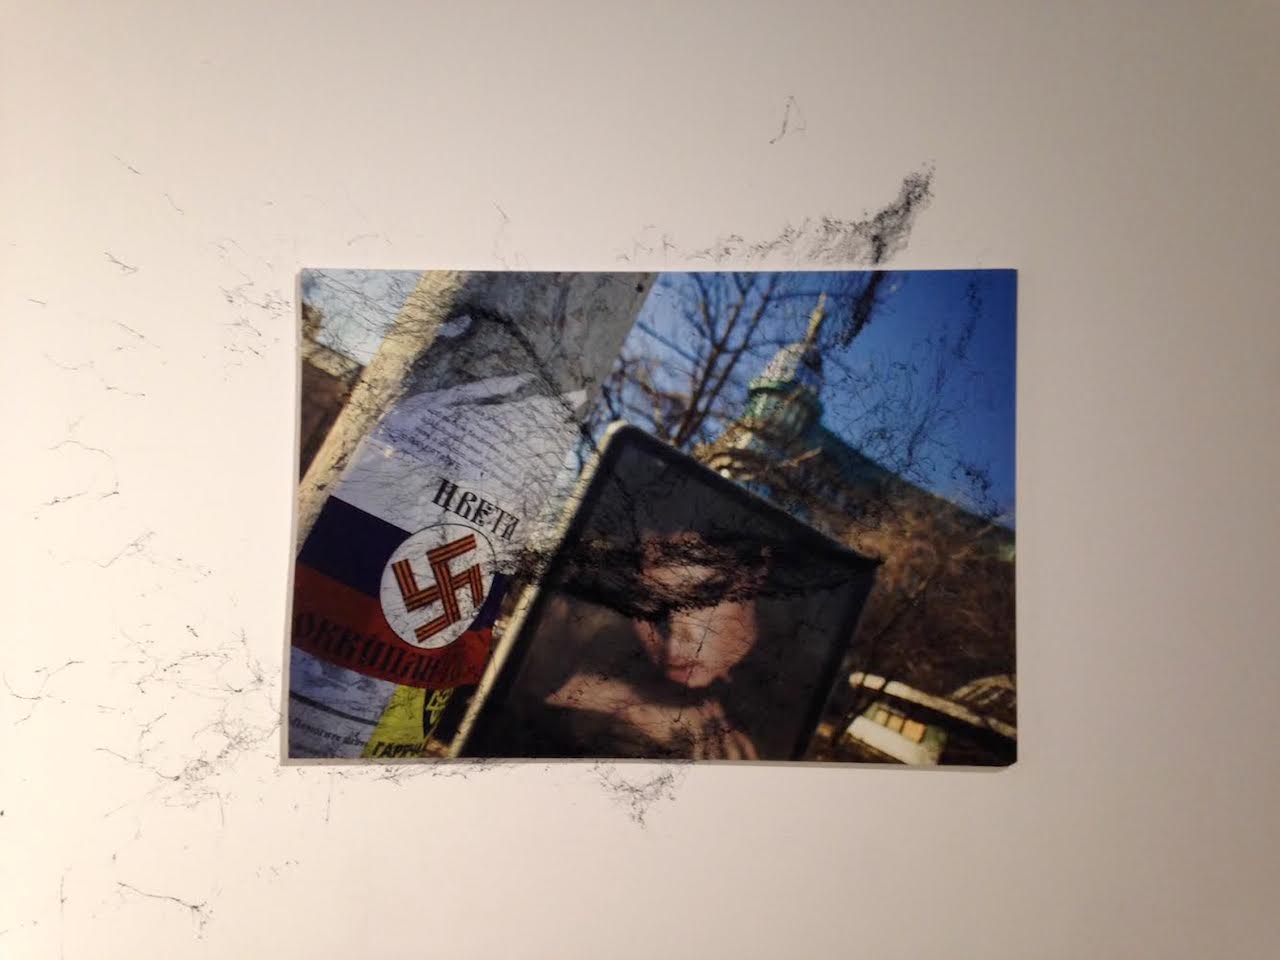 Anti-Russia photo vandalized in the gallery